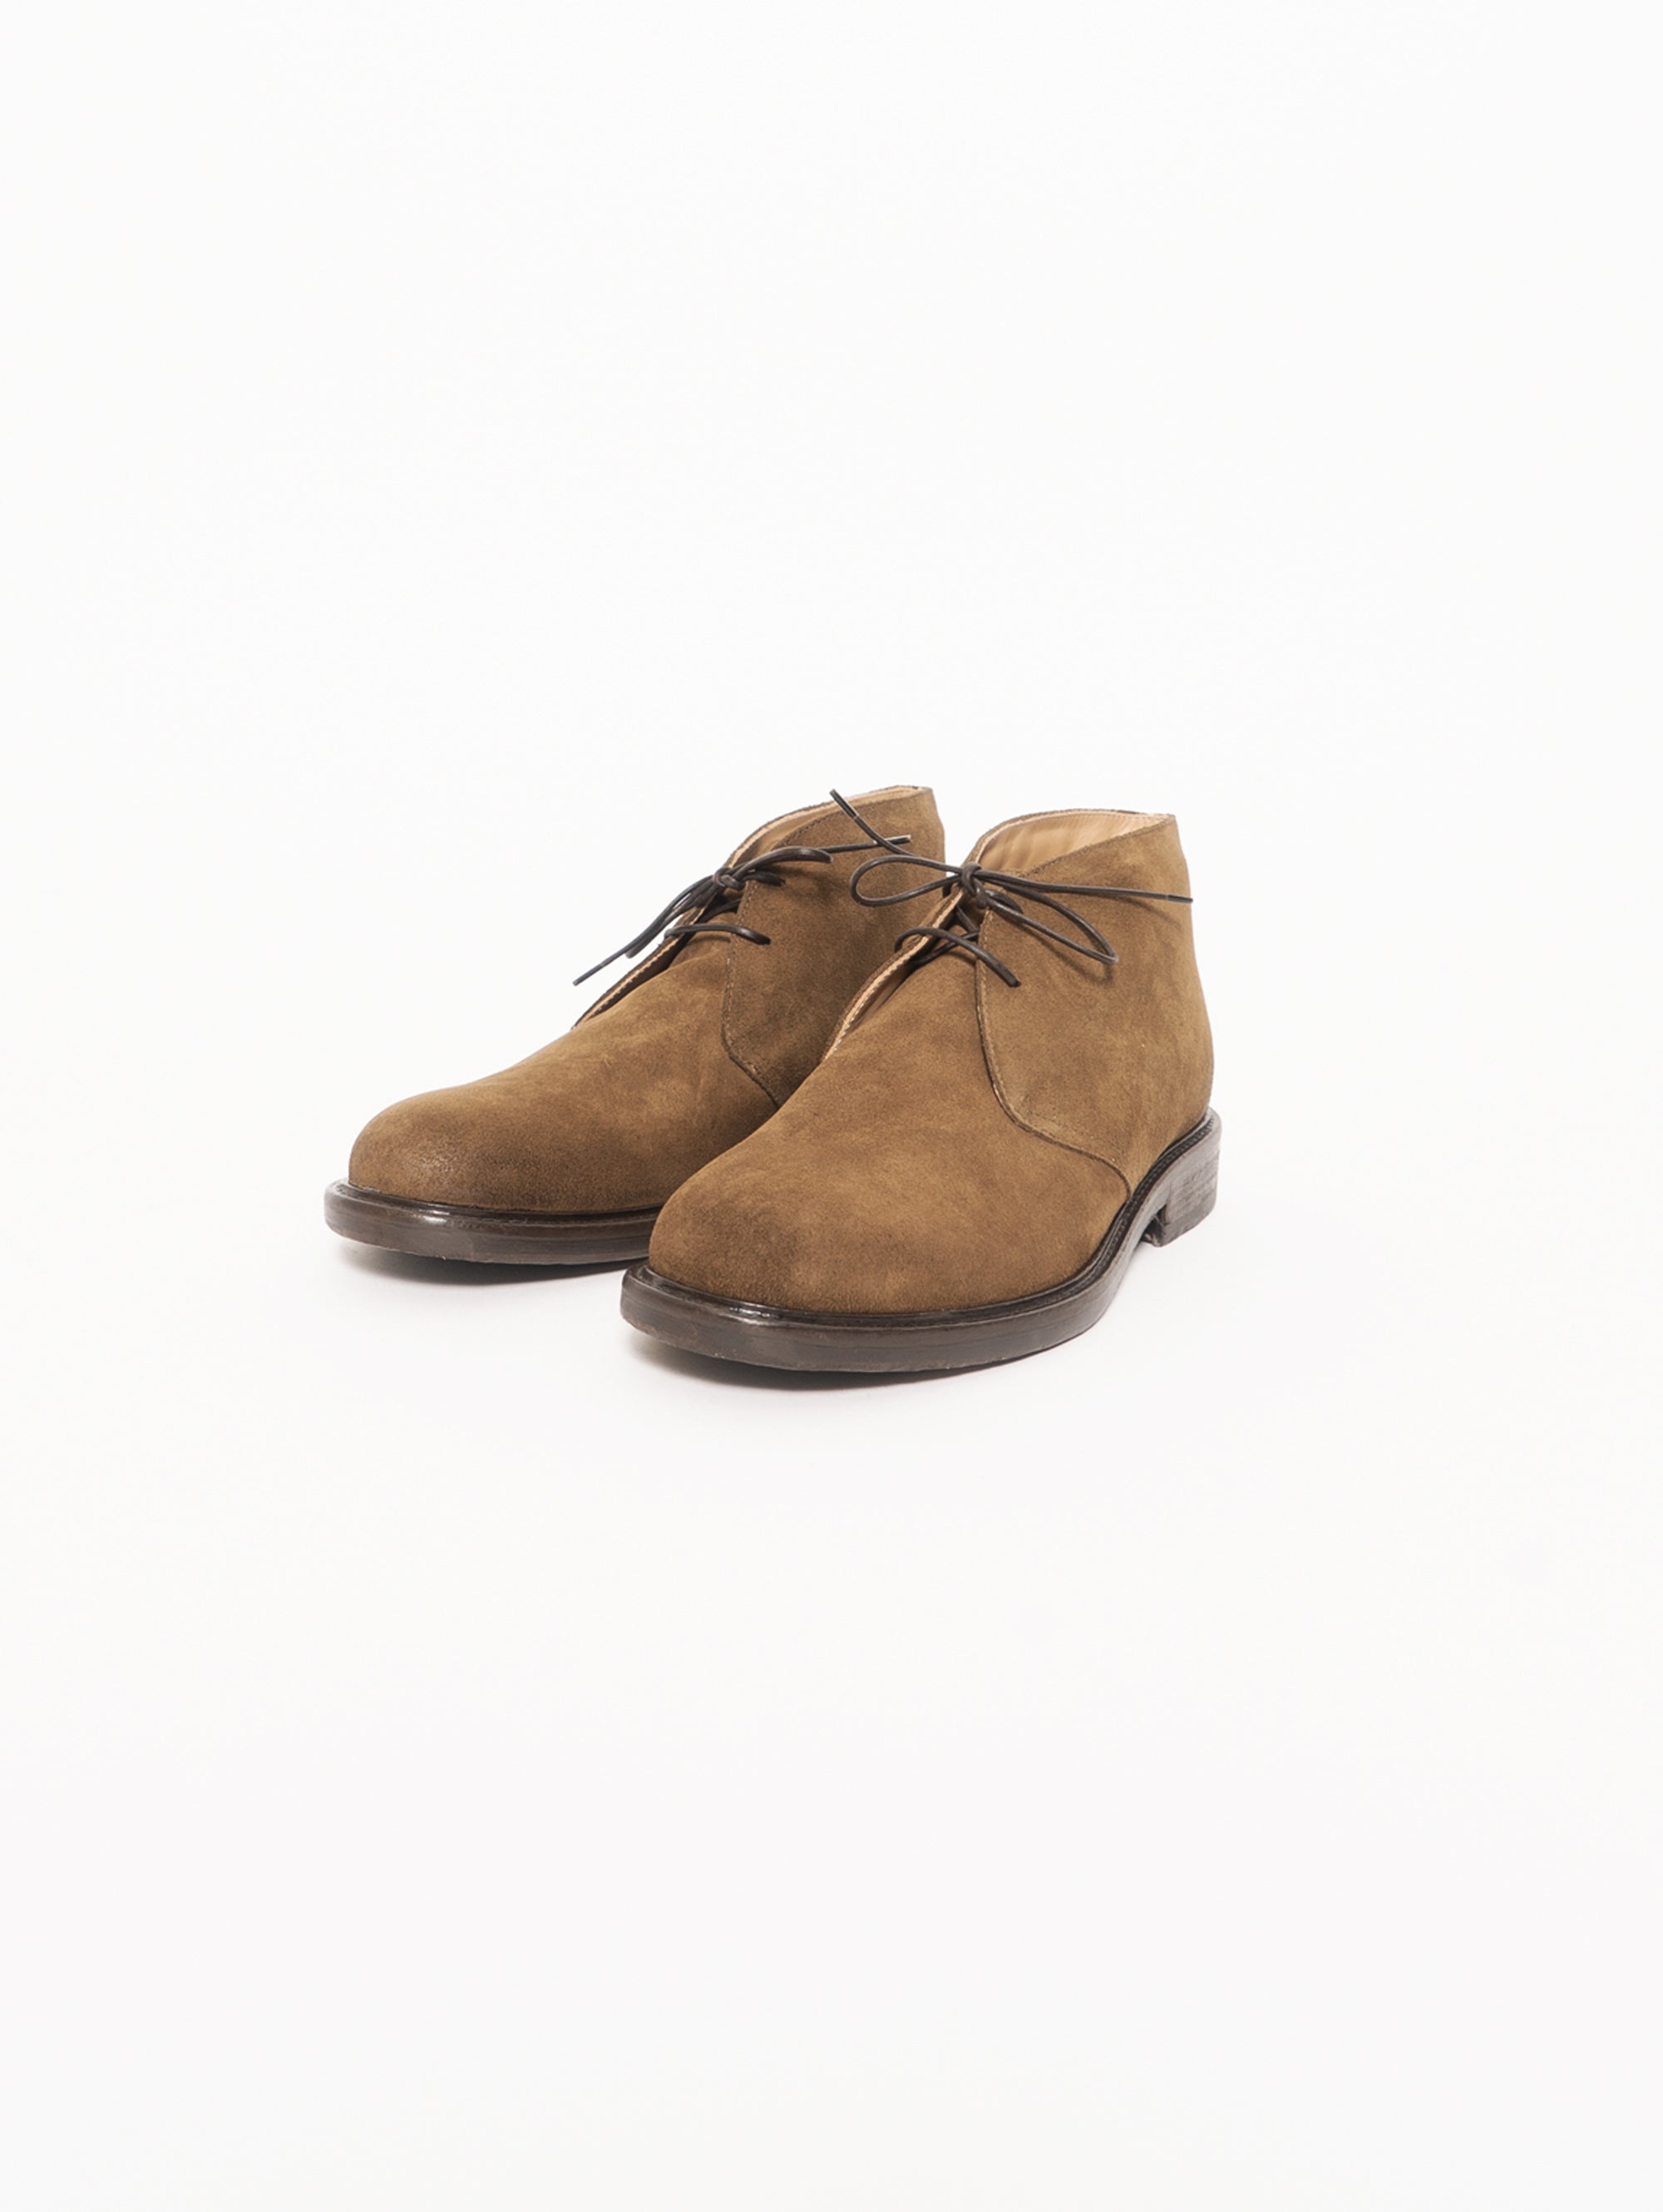 4303 Hydrovelour - Suede ankle boot - Kaky